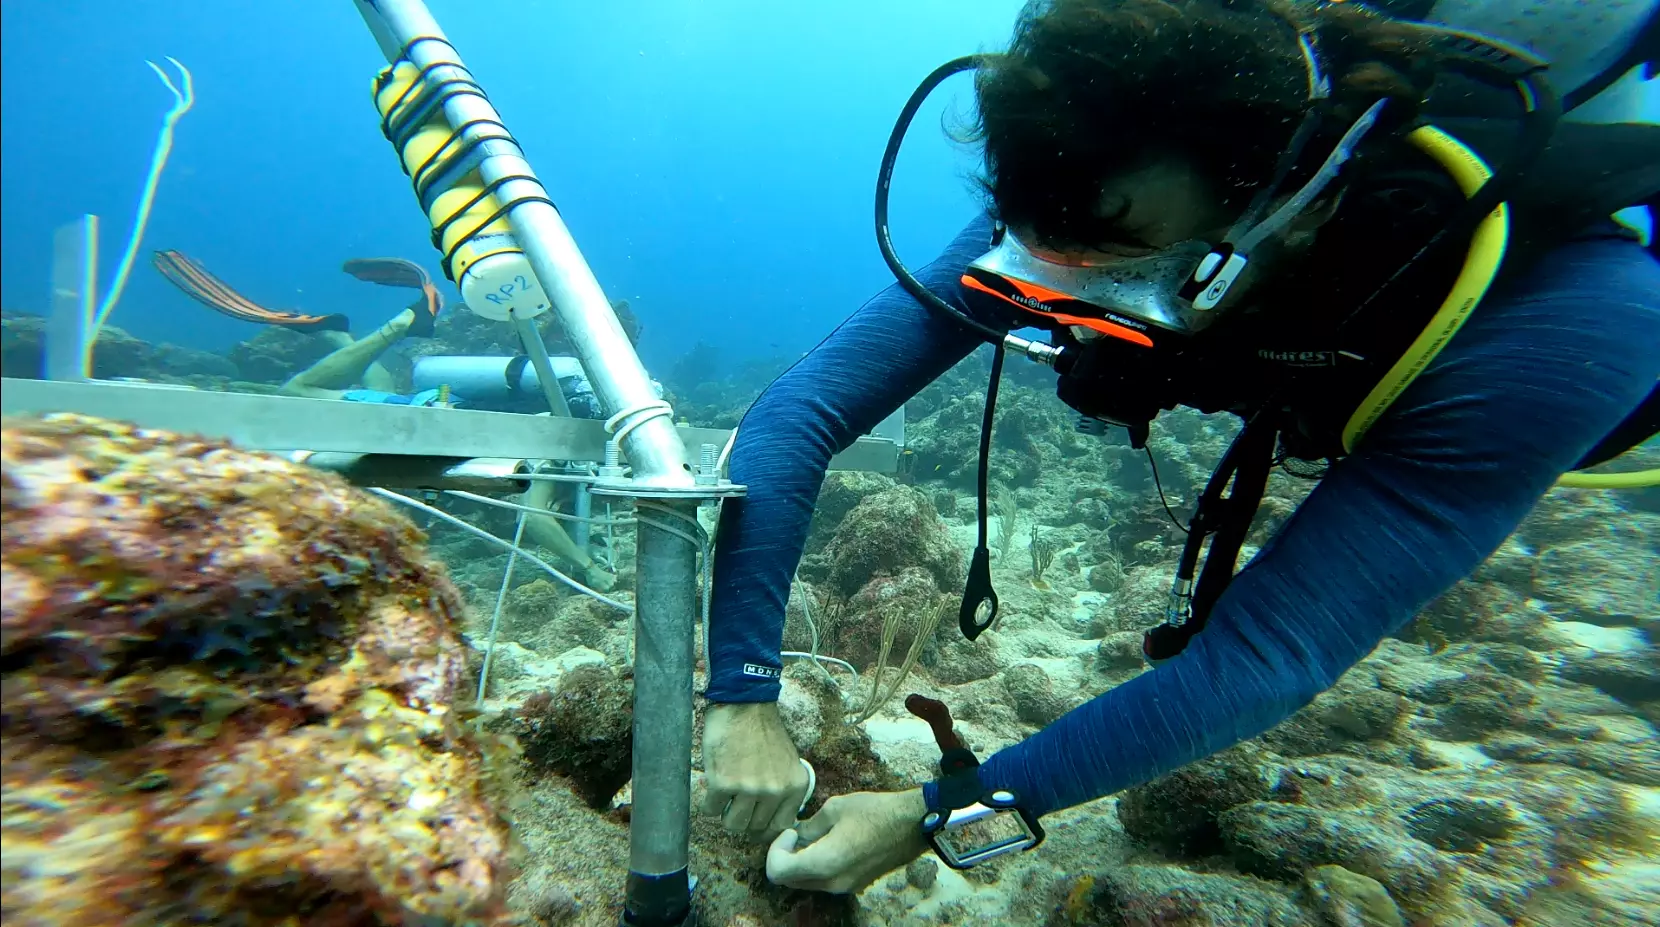 Fiexation of the Tripods on the Corral Reef